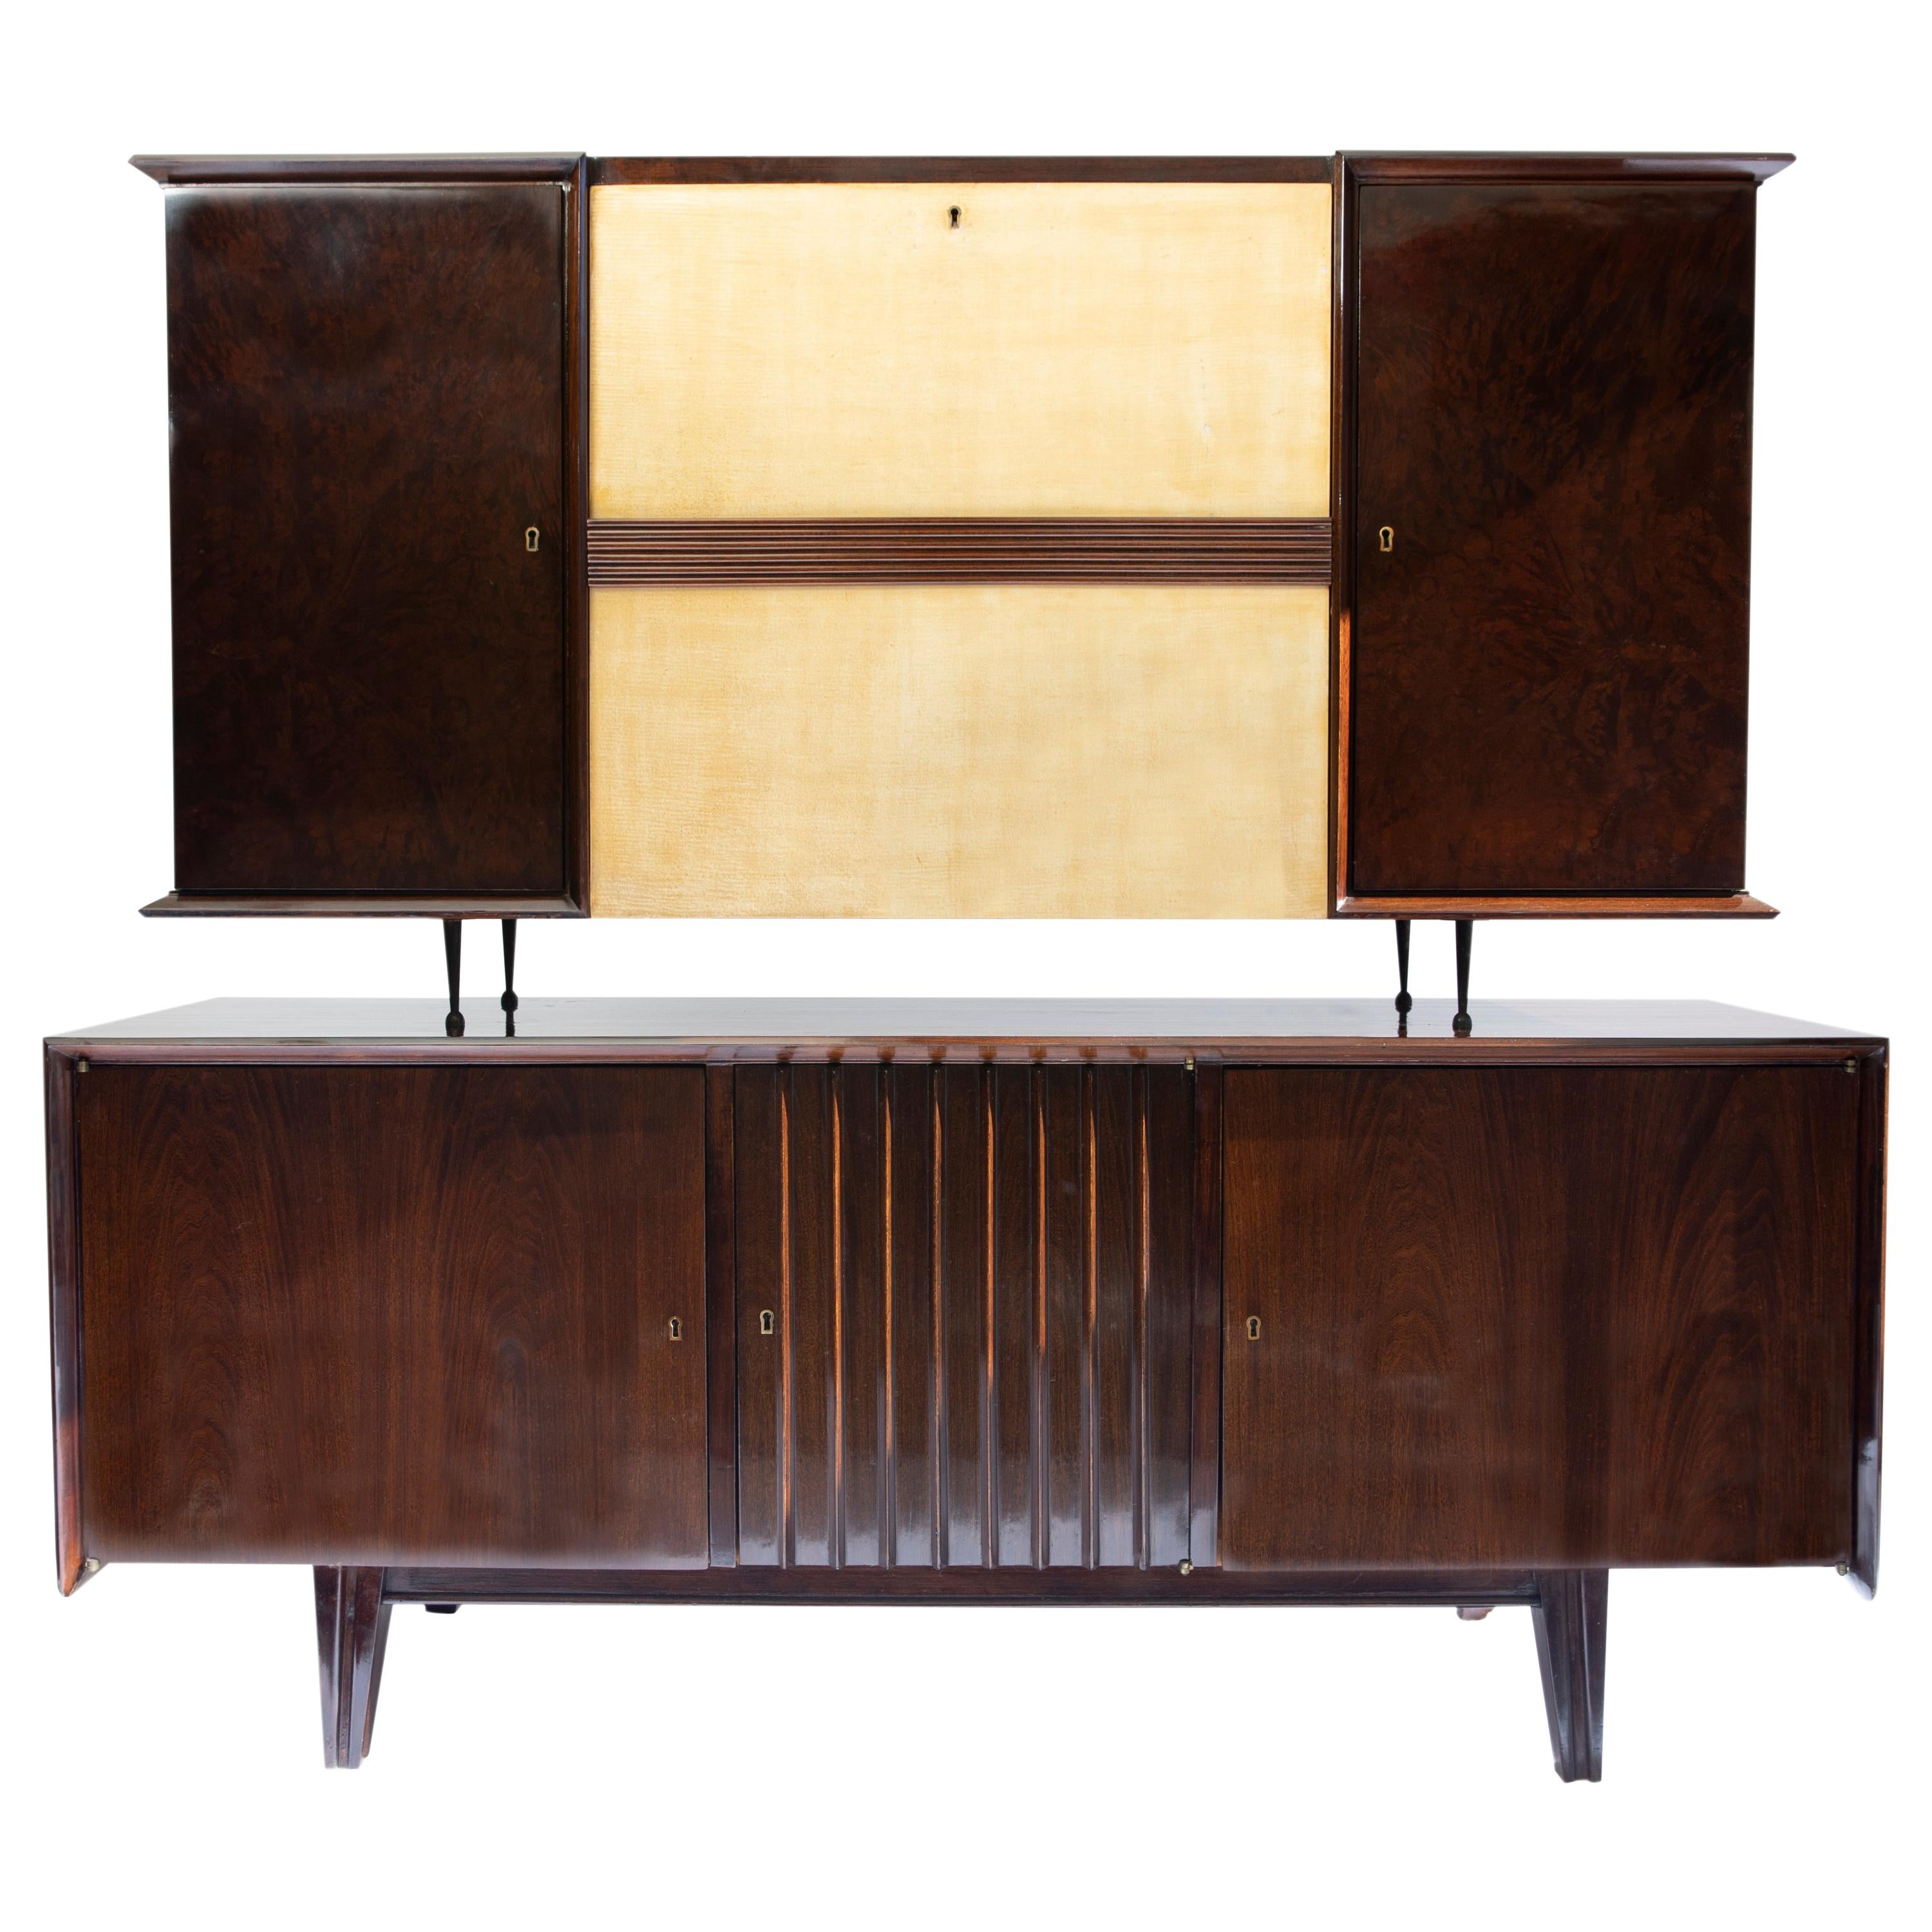 Wood, Glass, Parchment and Mirror Bar and Cabinet Set by Englander & Bonta, 1950 For Sale